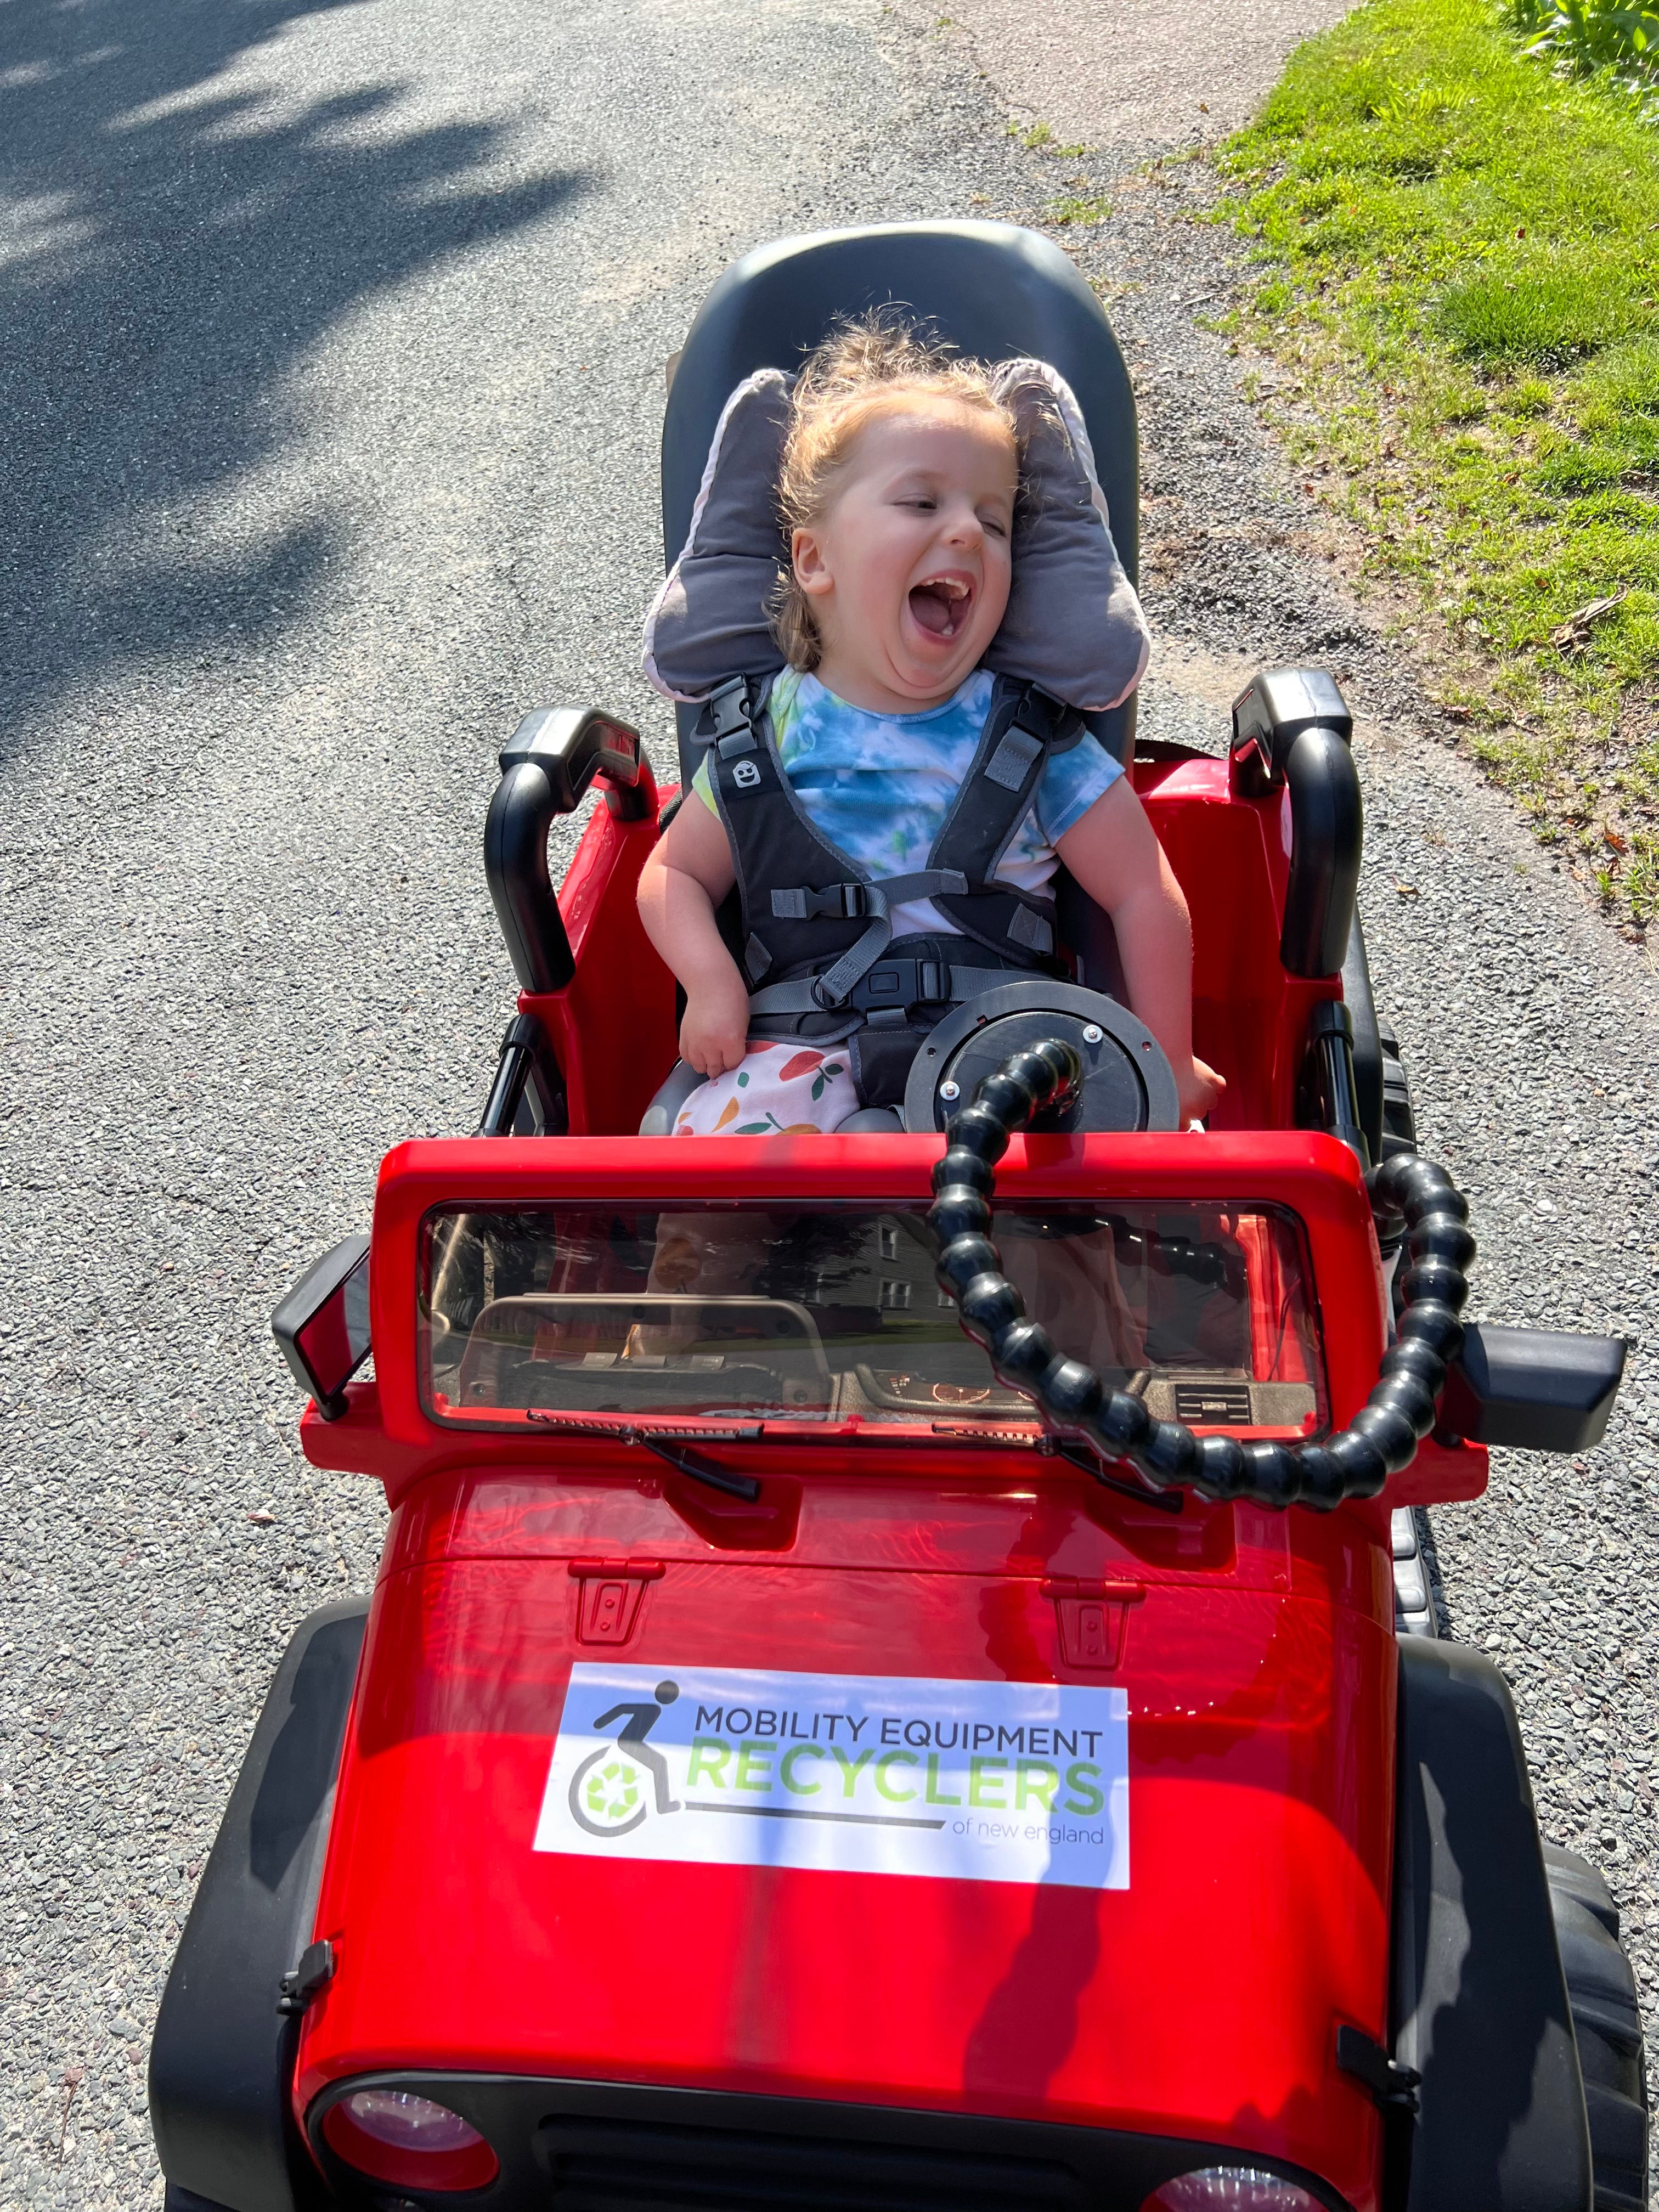 Bear, a young girl with blond hair wearing a tie-dyed tshirt, is laughing while sitting in her specially adapted red motorized Jeep